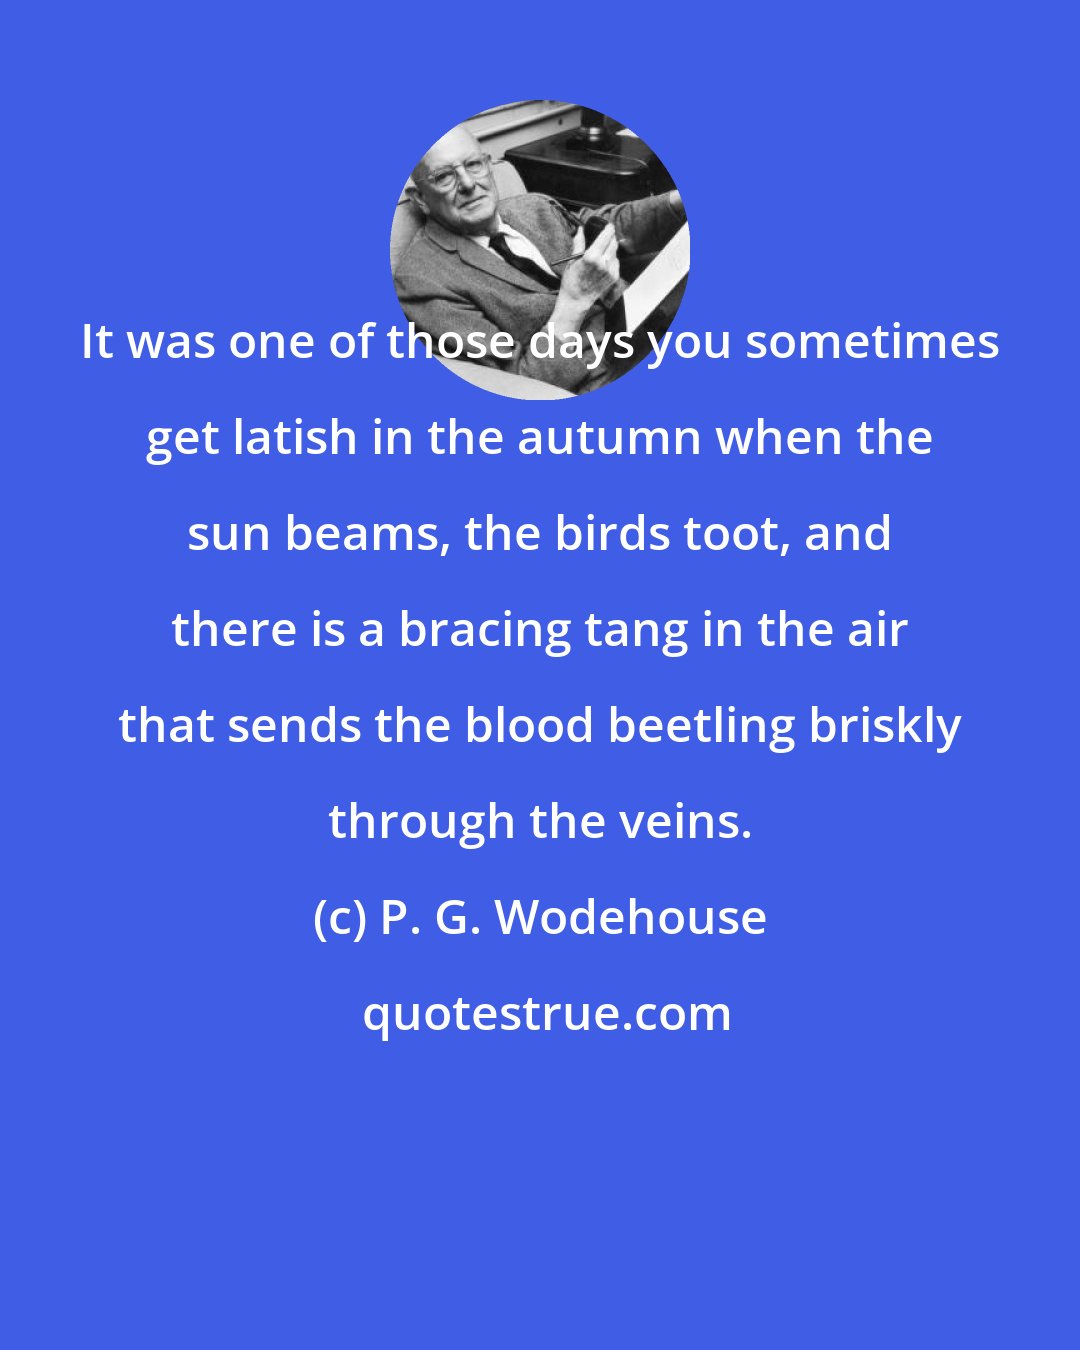 P. G. Wodehouse: It was one of those days you sometimes get latish in the autumn when the sun beams, the birds toot, and there is a bracing tang in the air that sends the blood beetling briskly through the veins.